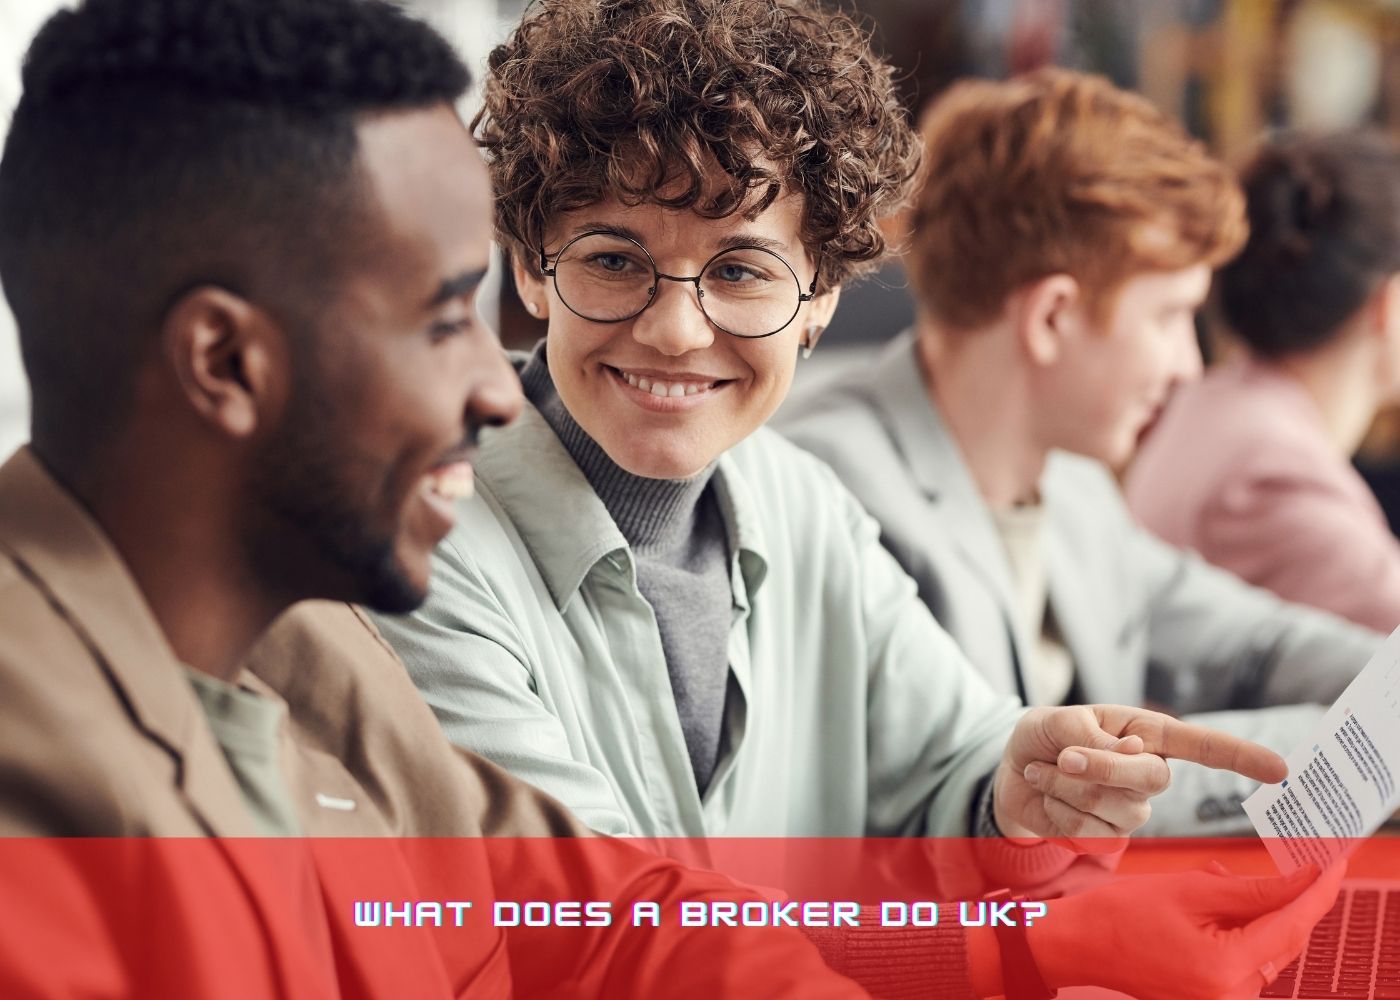 What does a broker do UK?